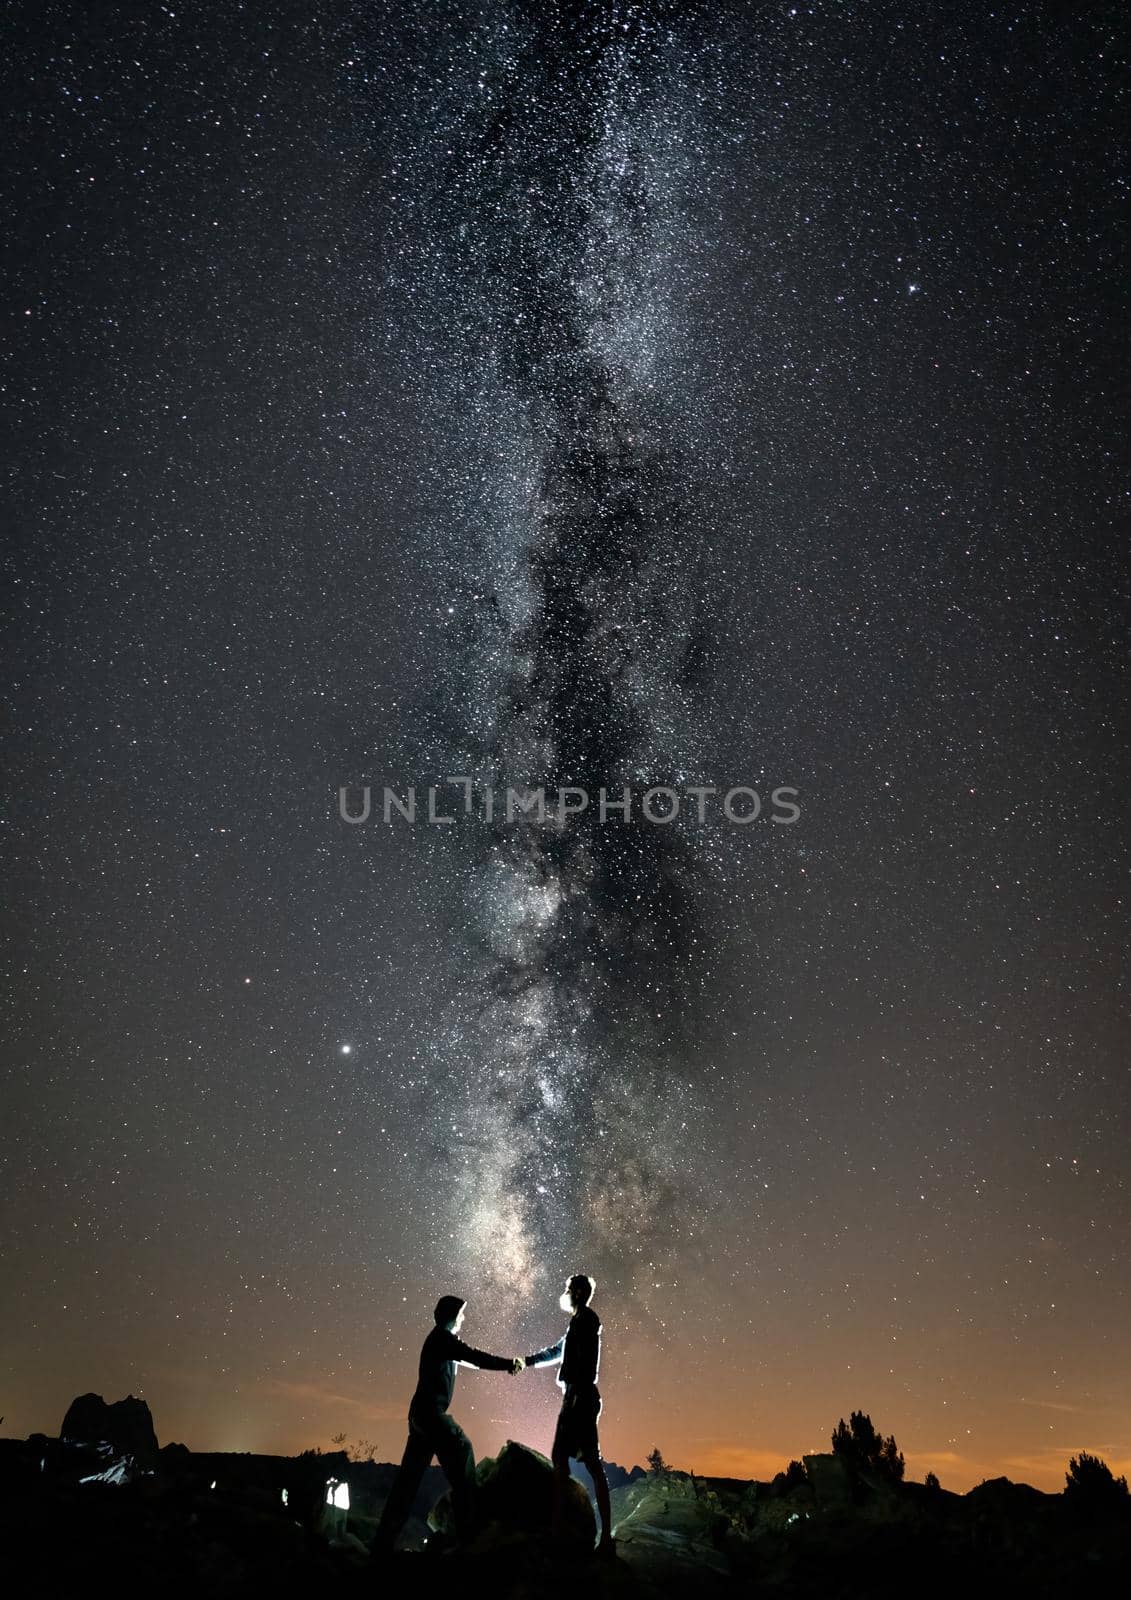 Two persons with masks shaking hands against milky way, vertical composition